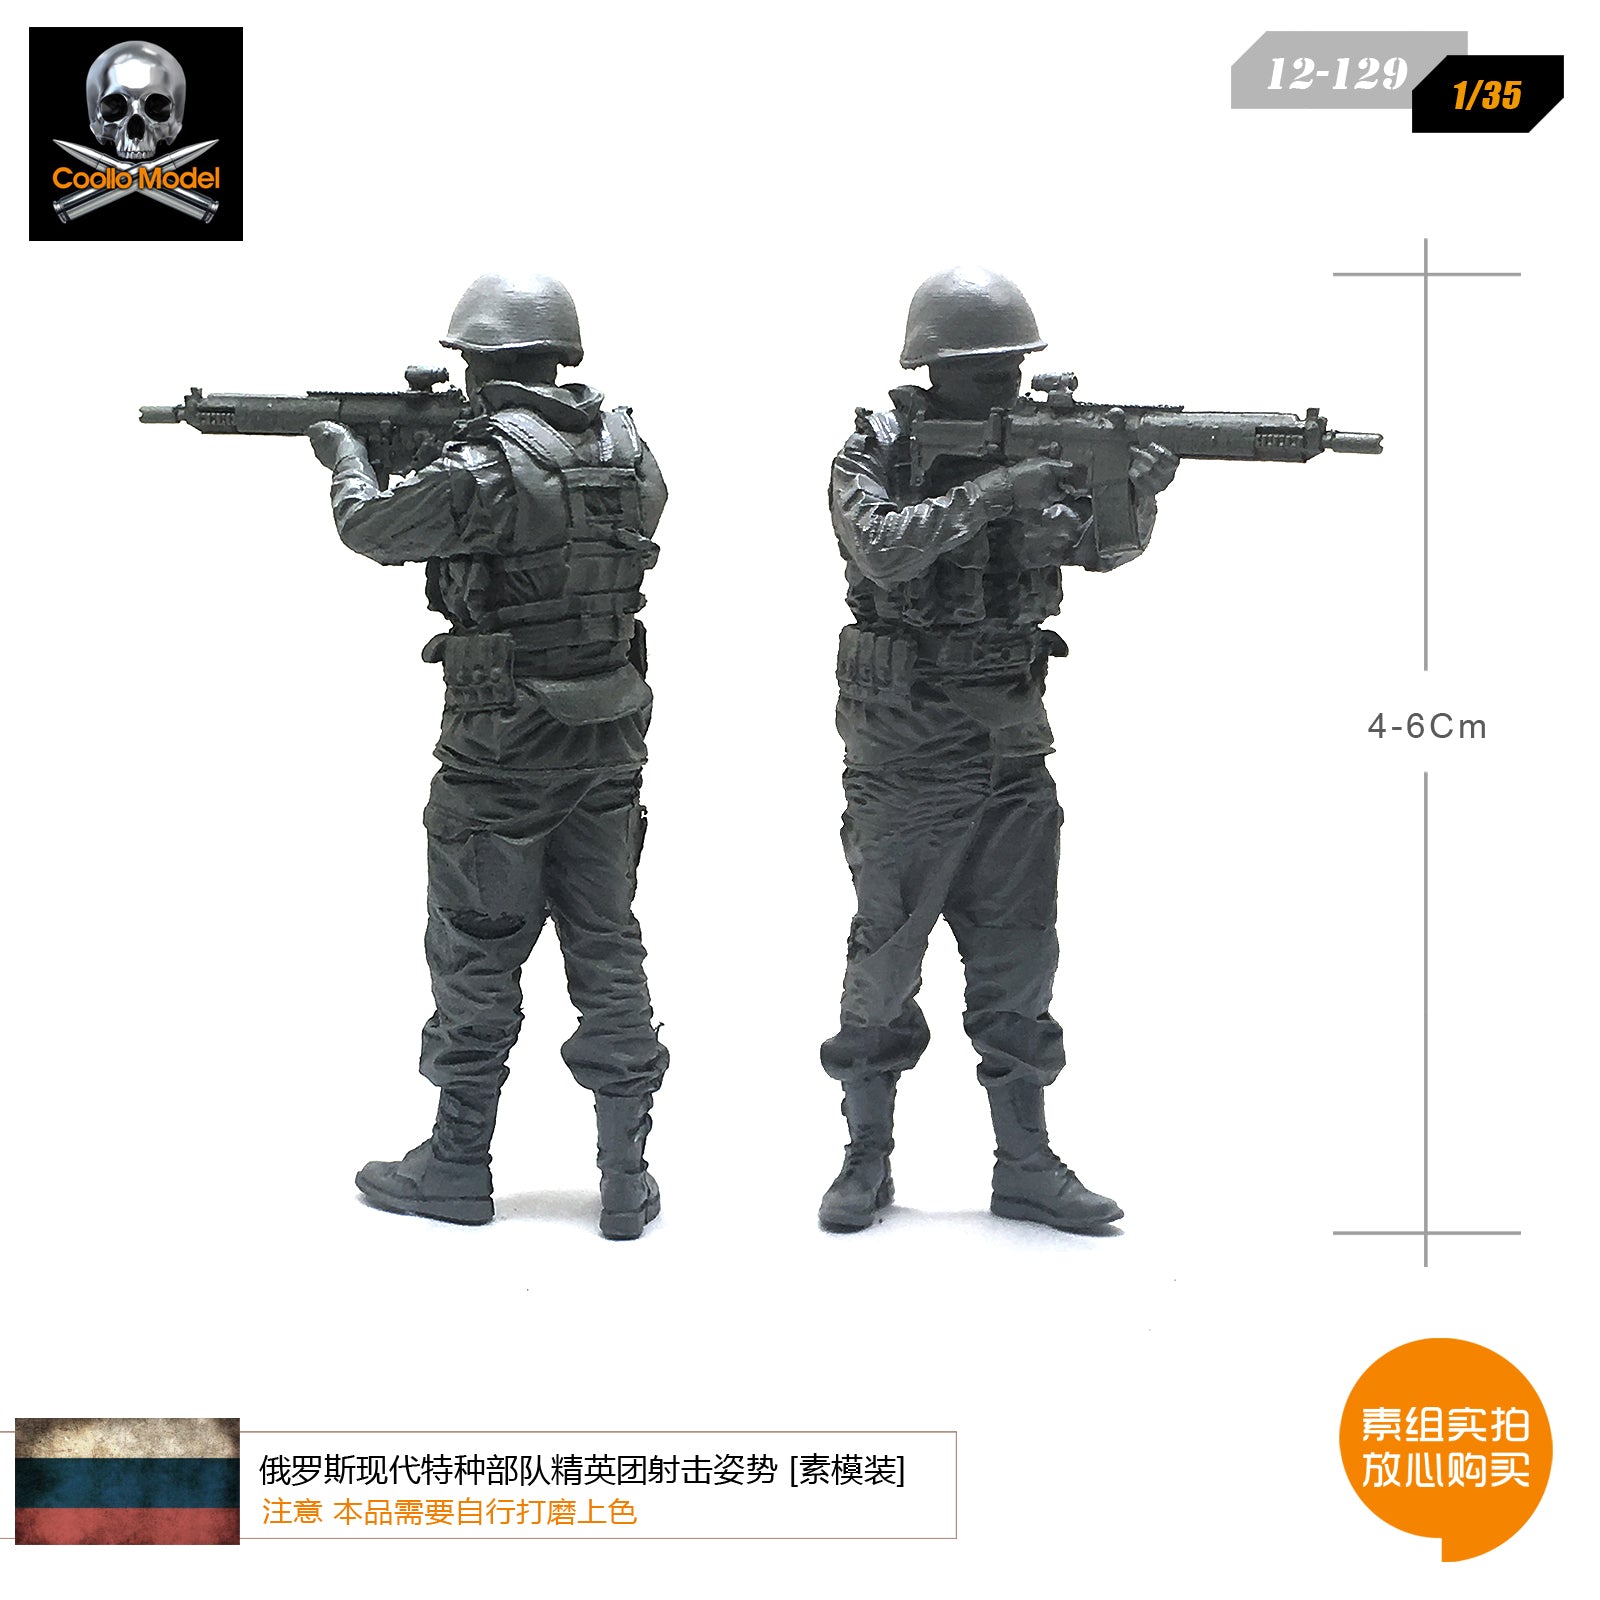 1/35 modern Russian special forces elite group shooting posture resin soldiers model 12-129